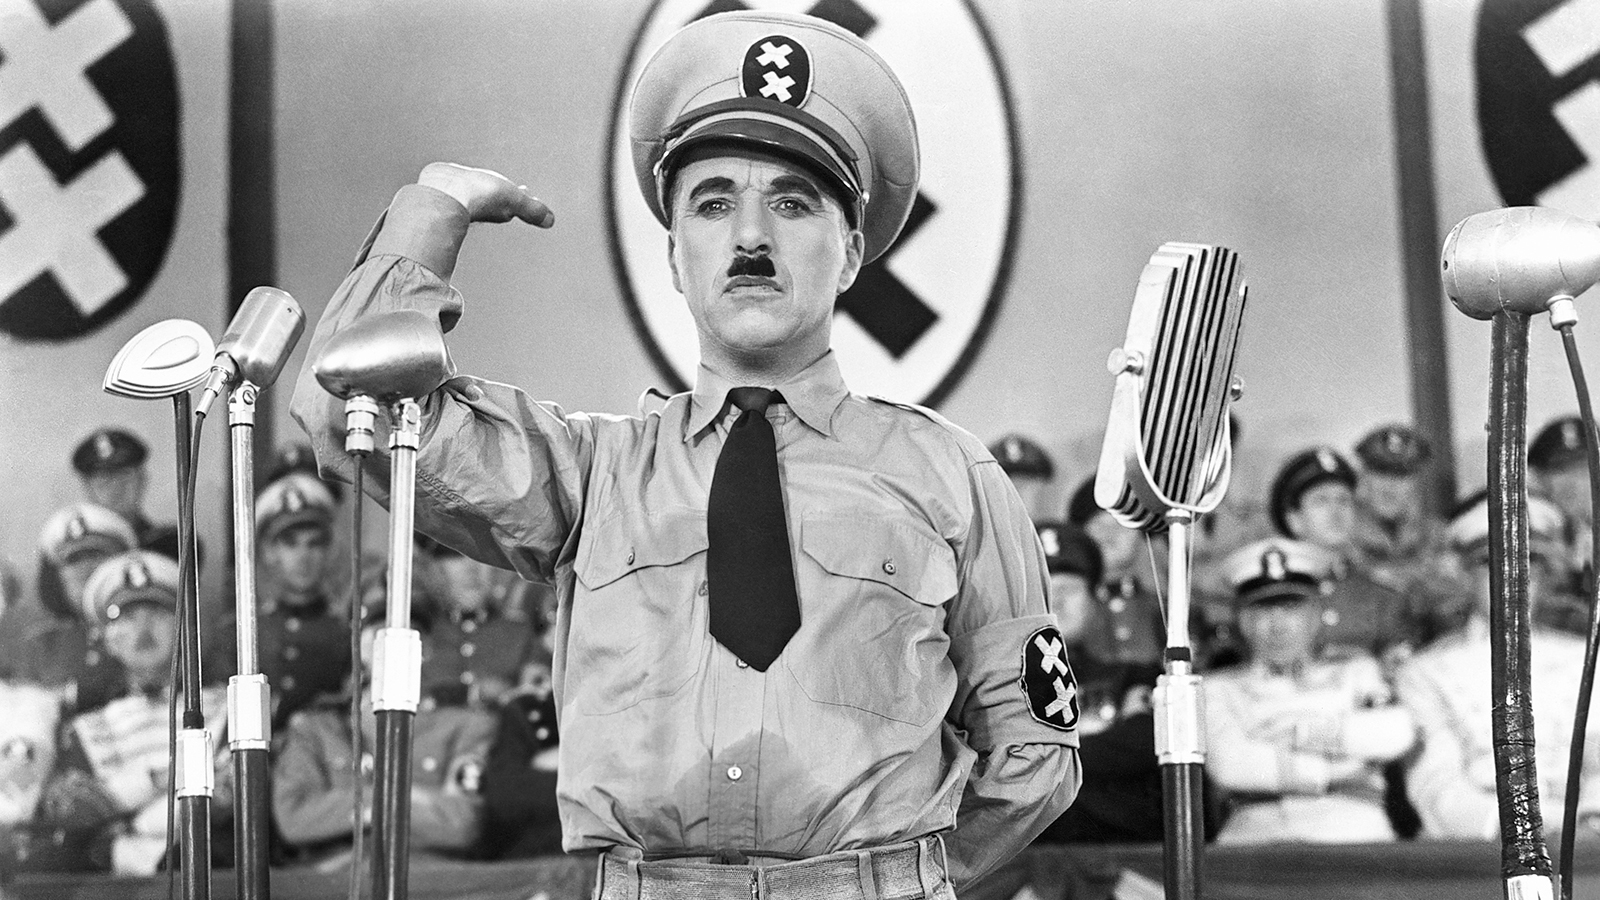 Amazing The Great Dictator Pictures & Backgrounds